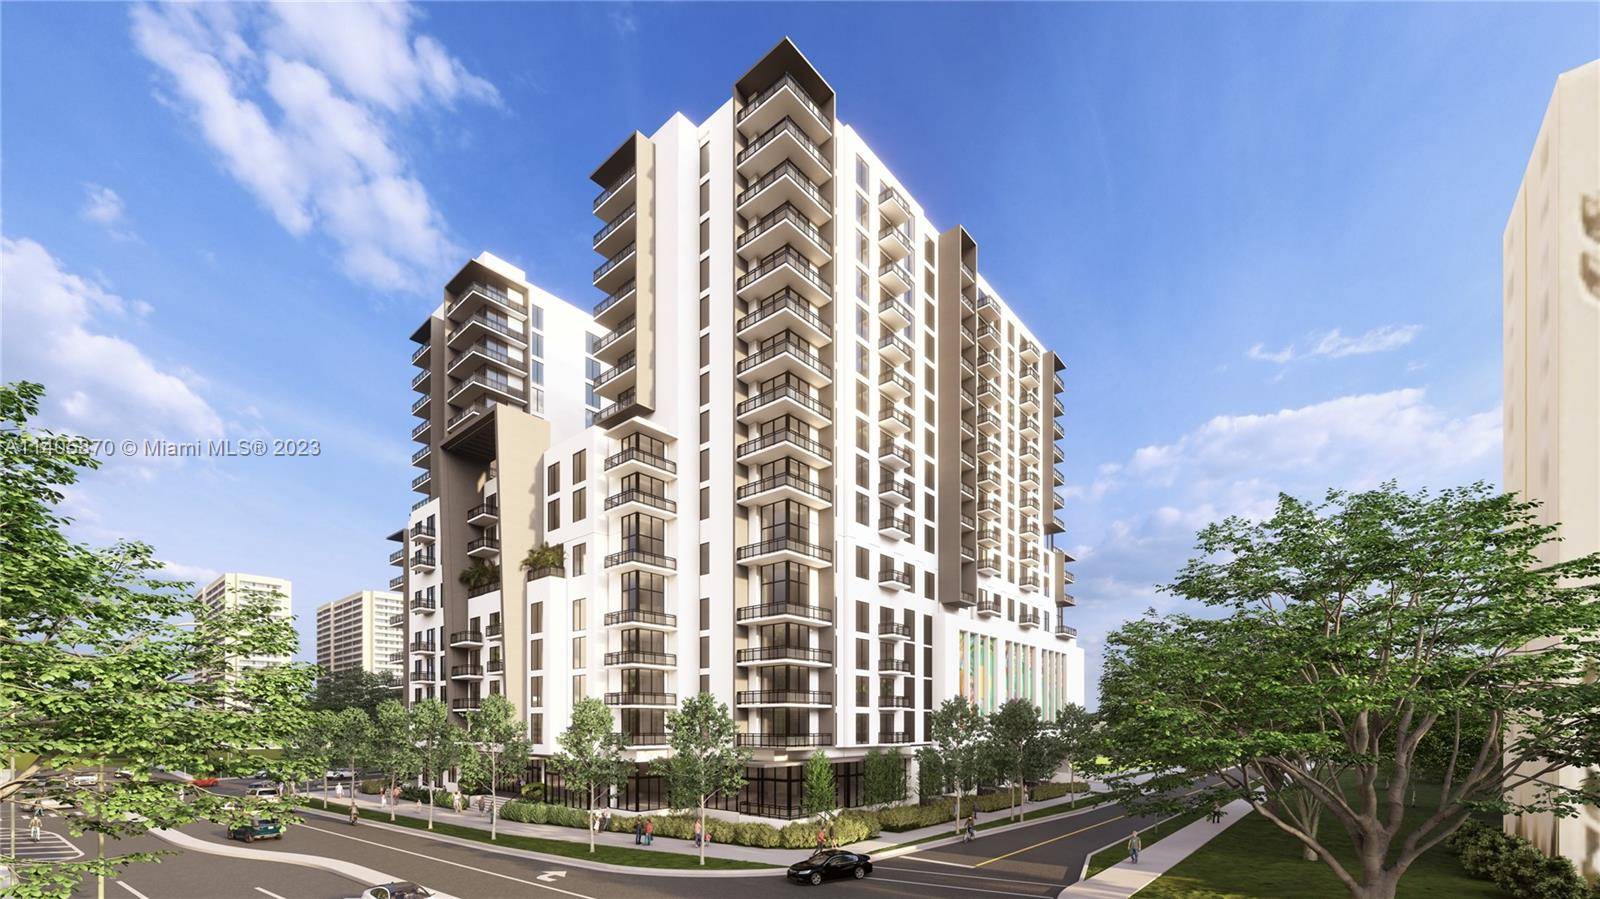 Miami's best new investment venture a flexible fully furnished condominium opportunity allowing for both short long term rentals or a residence you can call home.